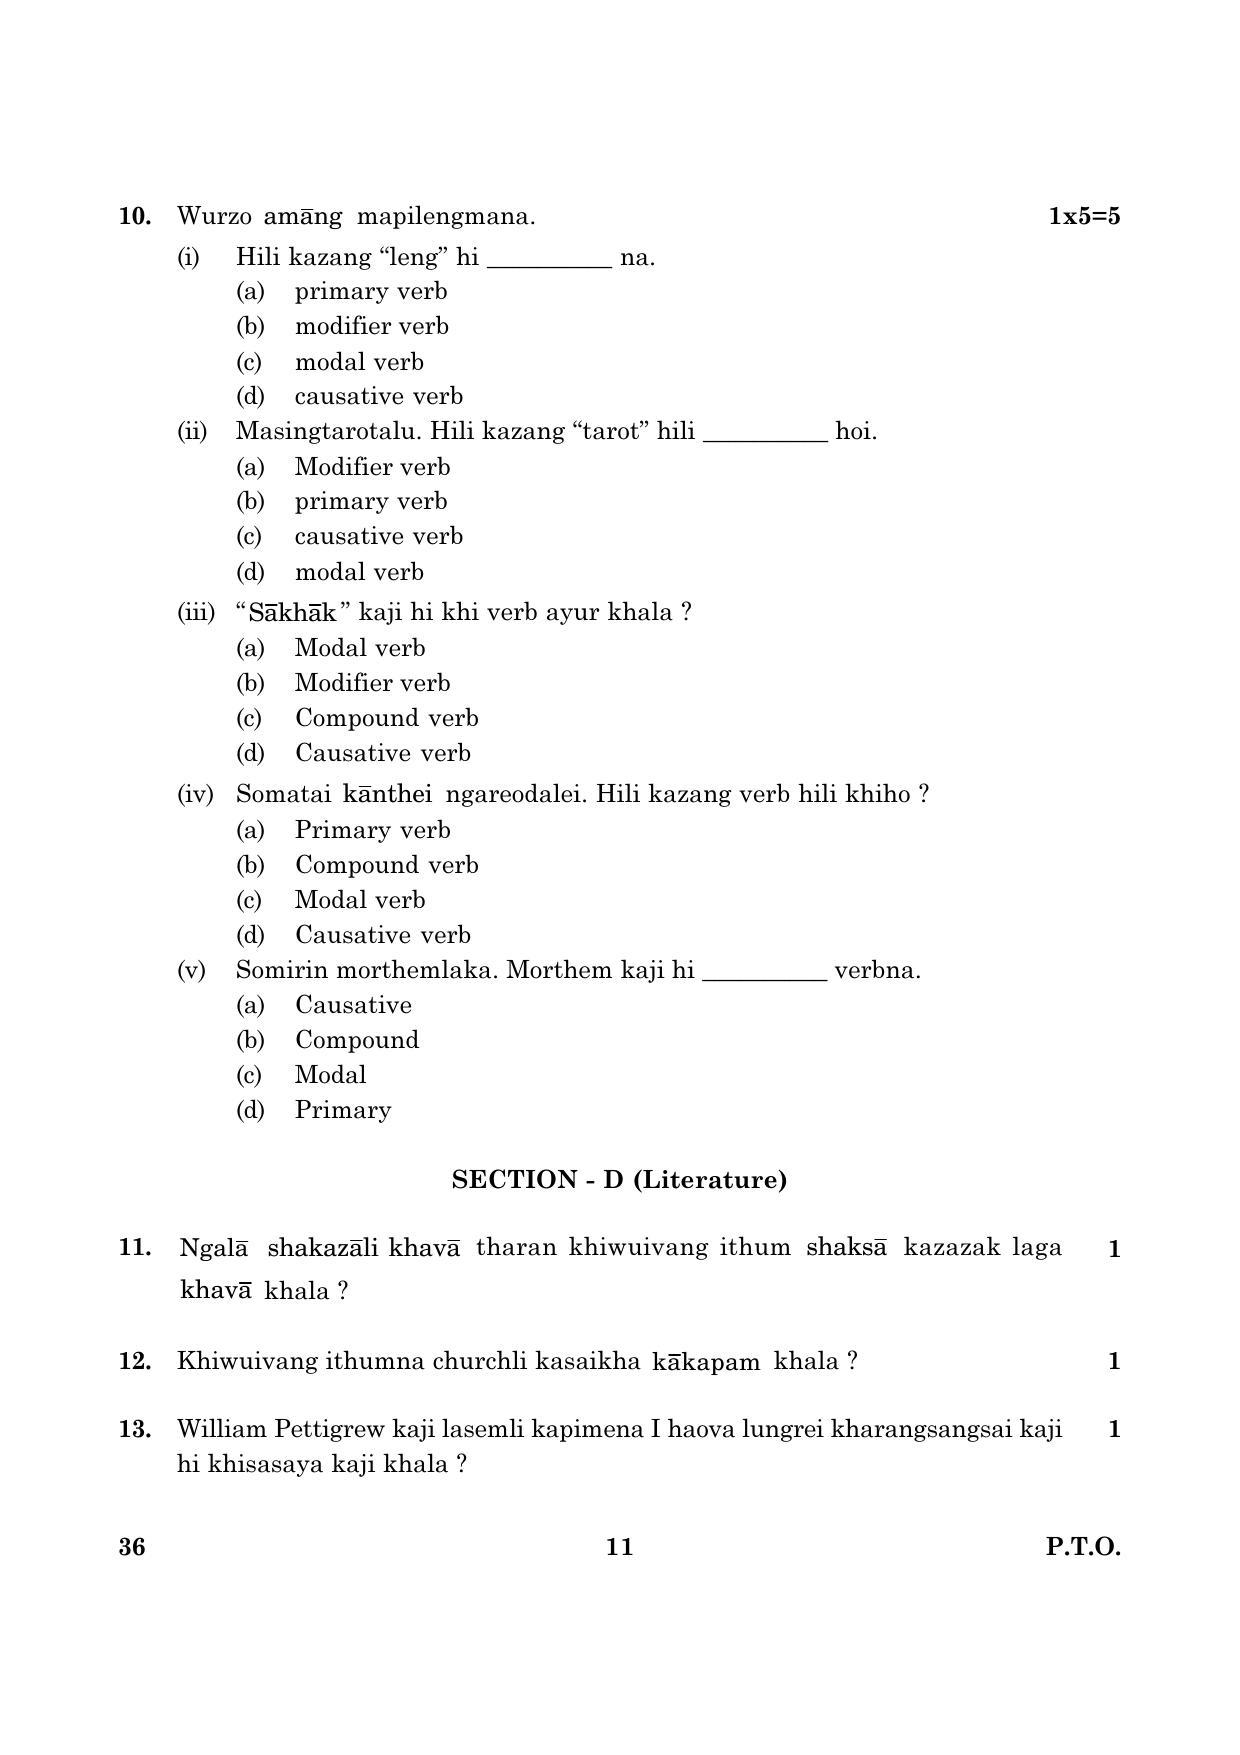 CBSE Class 10 036 Tangkhul (English) 2016 Question Paper - Page 11